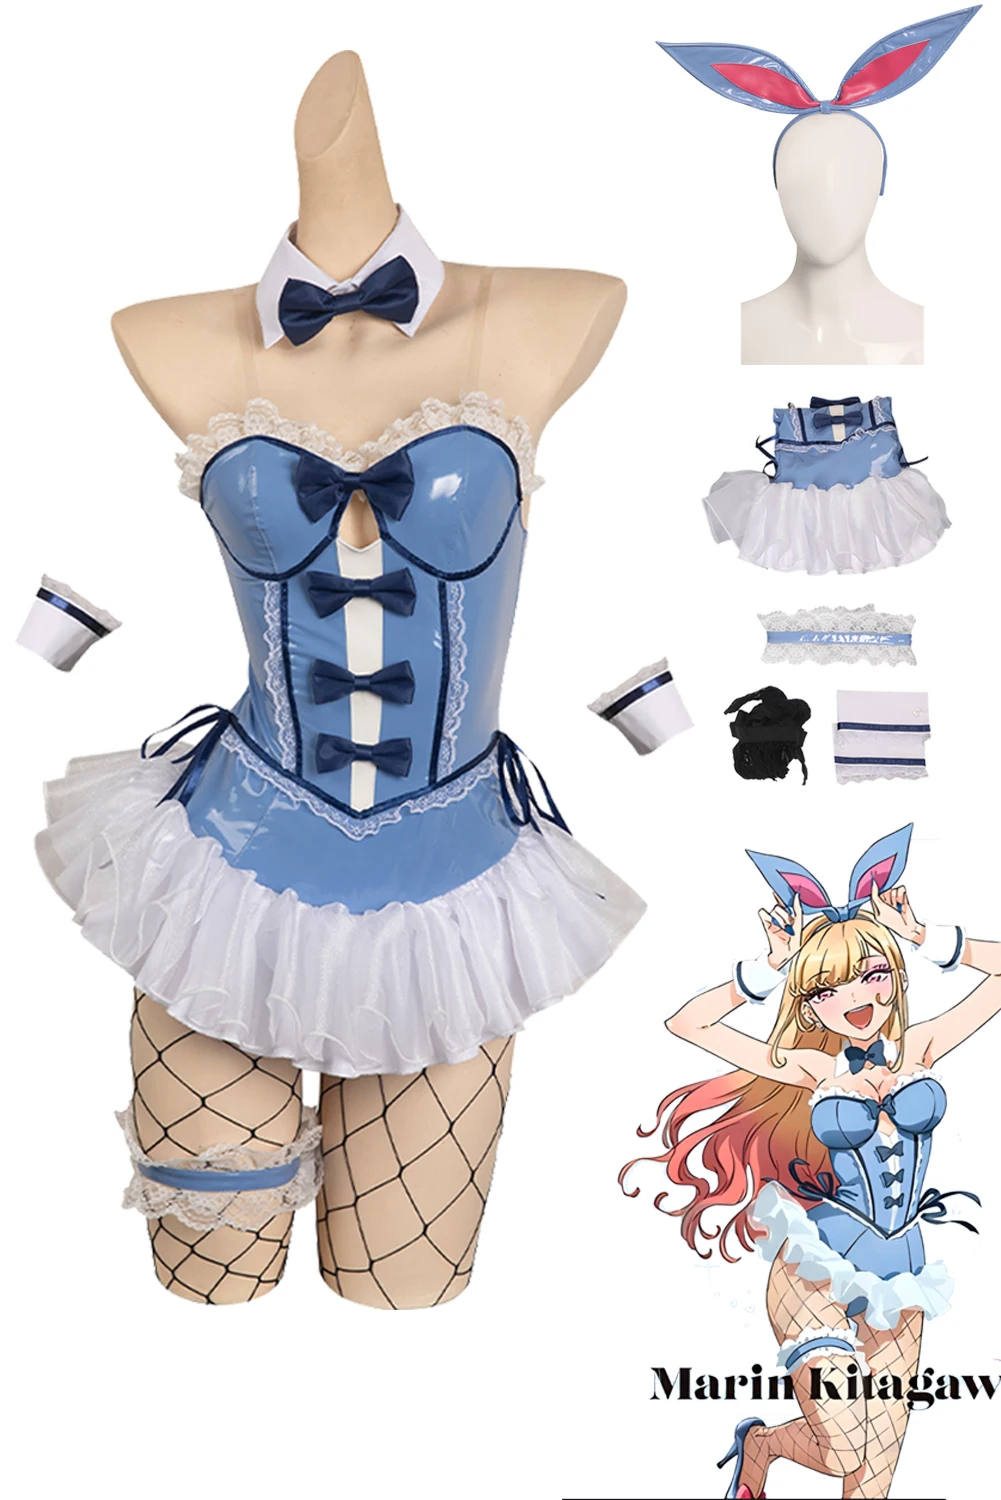 

My Dress Up Darling Role Play Kitagawa Marin Cosplay Costume Dress Girl Women Adult Fantasy Fancy Dress Up Party Clothes